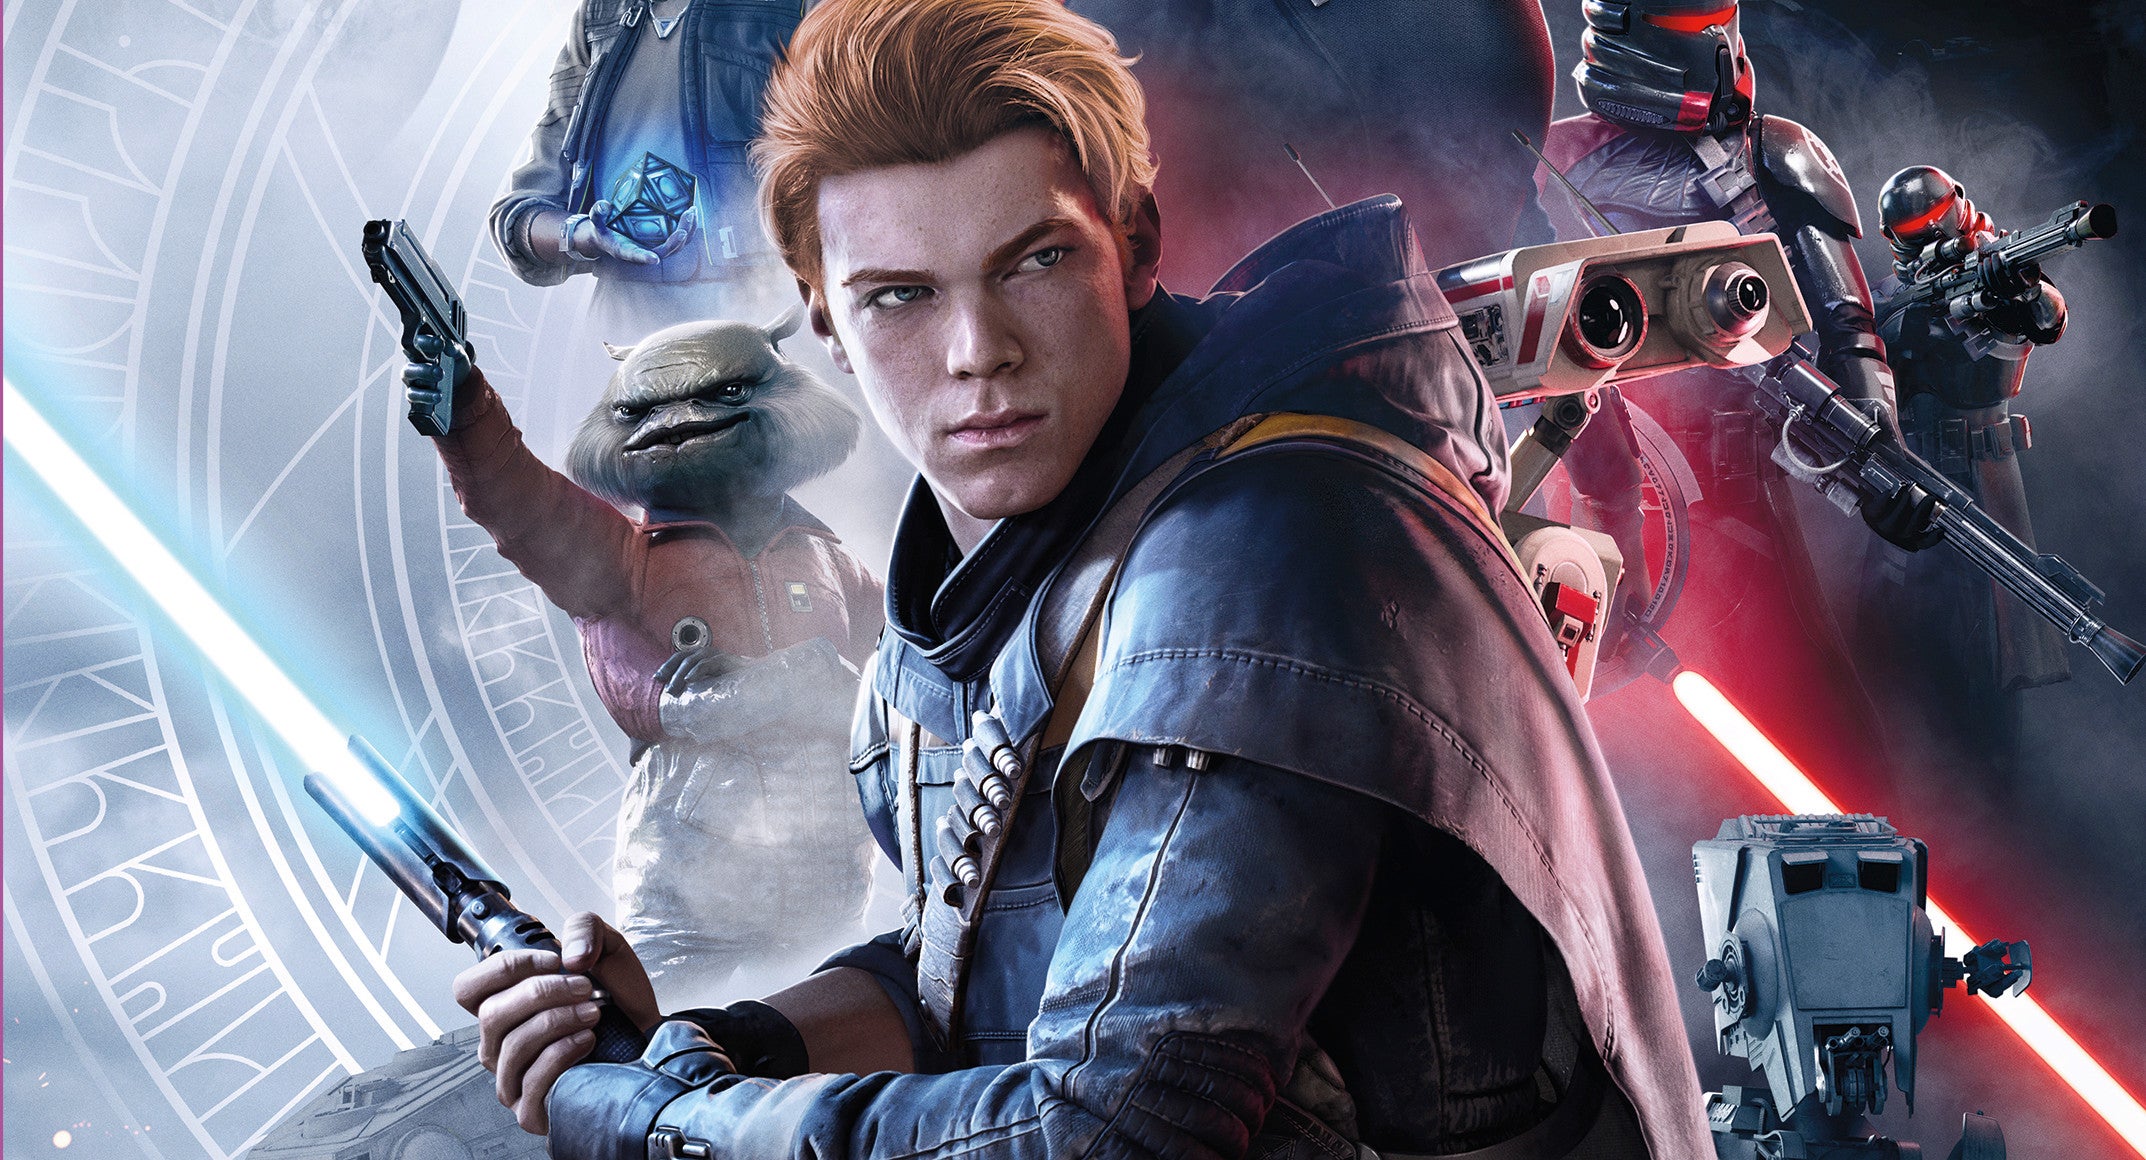 Image for Star Wars Jedi: Fallen Order joins EA Play and Game Pass Ultimate on Xbox Series X launch day